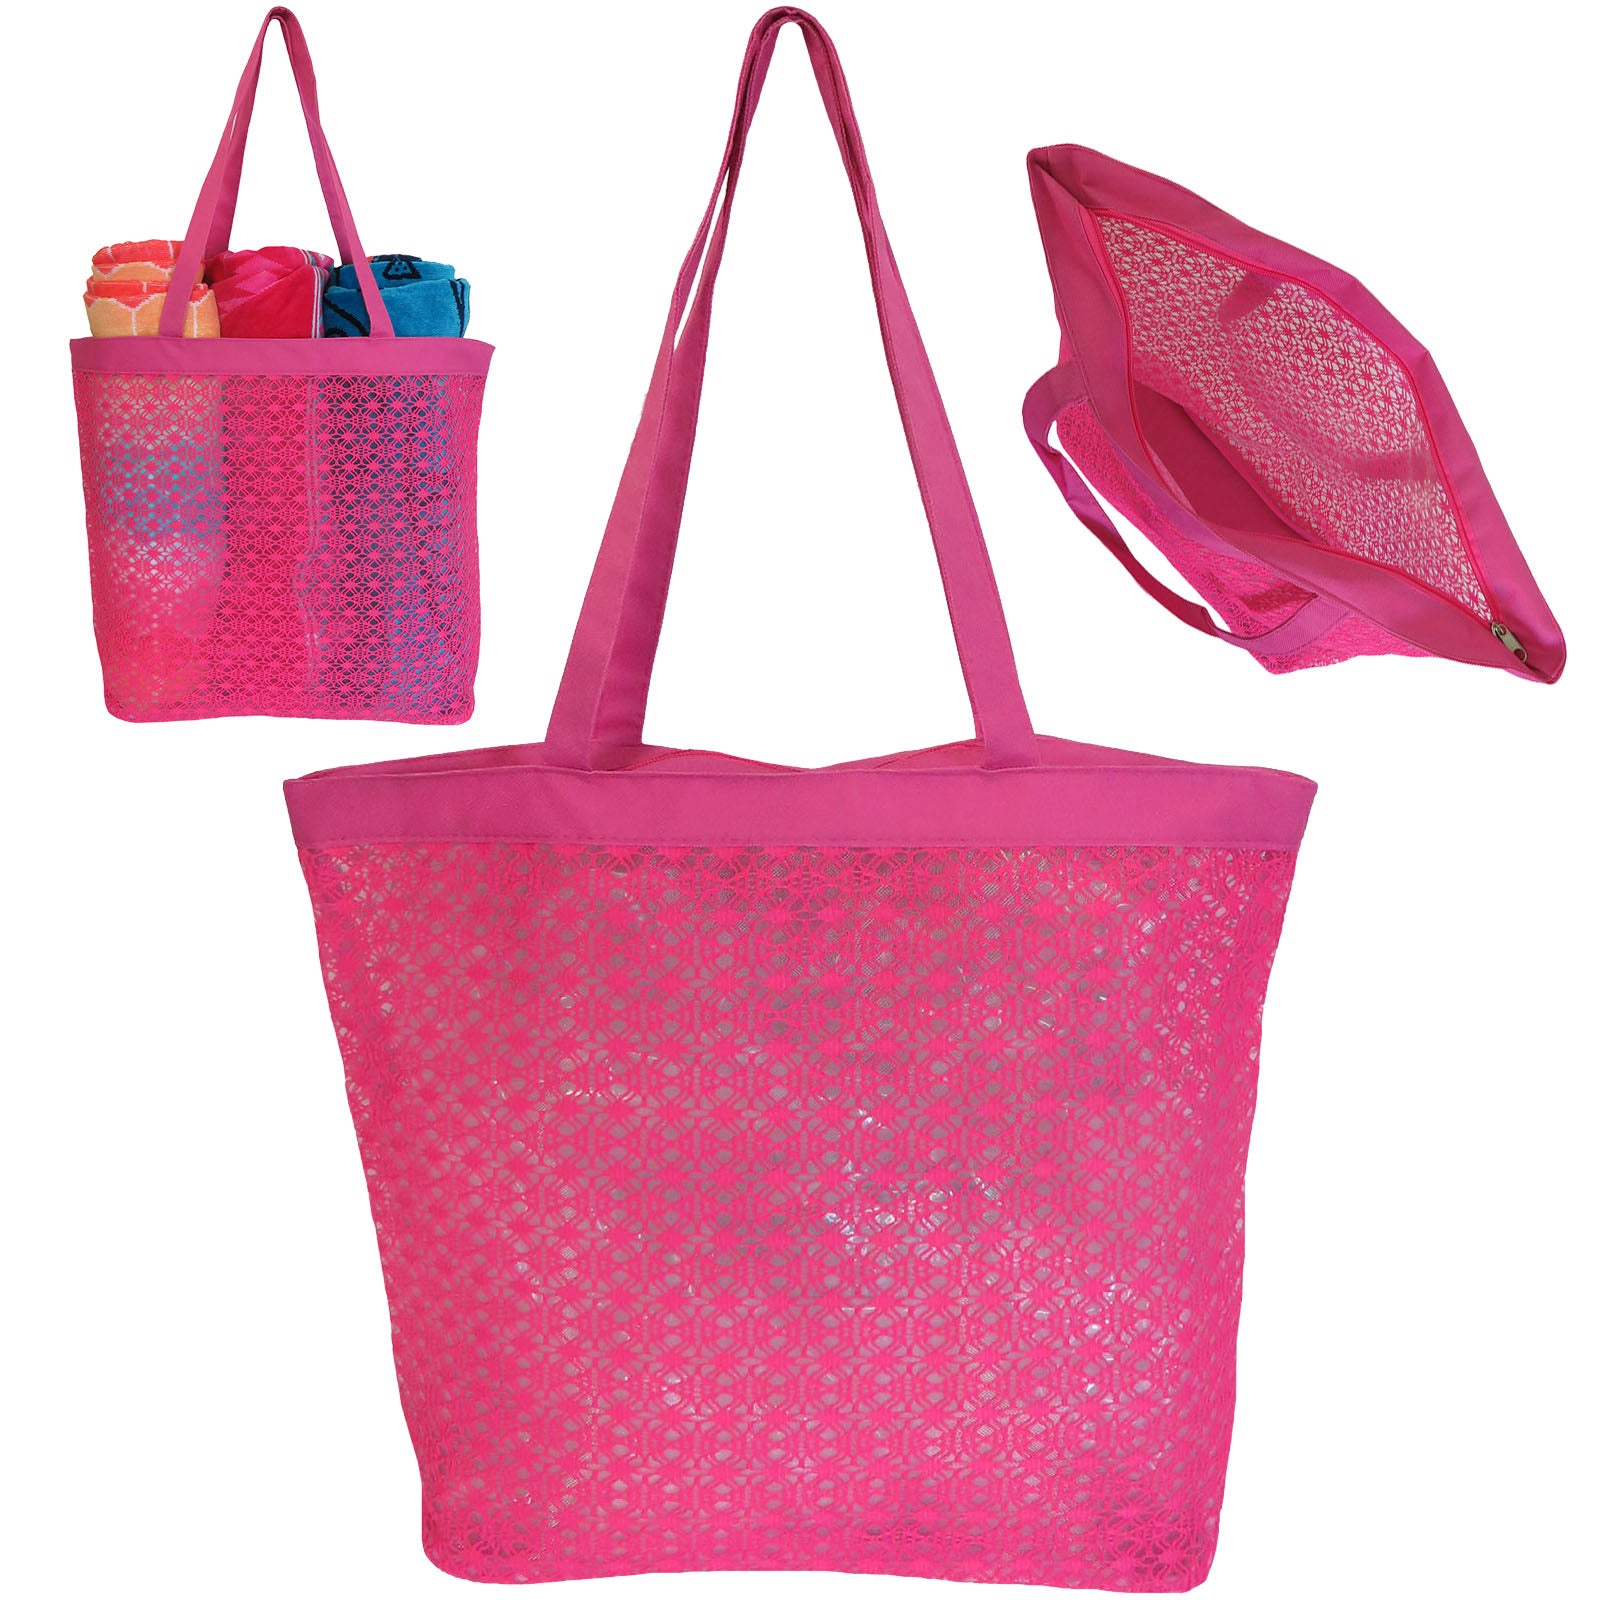 Wholesale Mesh Beach Bag Market Tote with Embroidery - Alessa Vibe in Pink